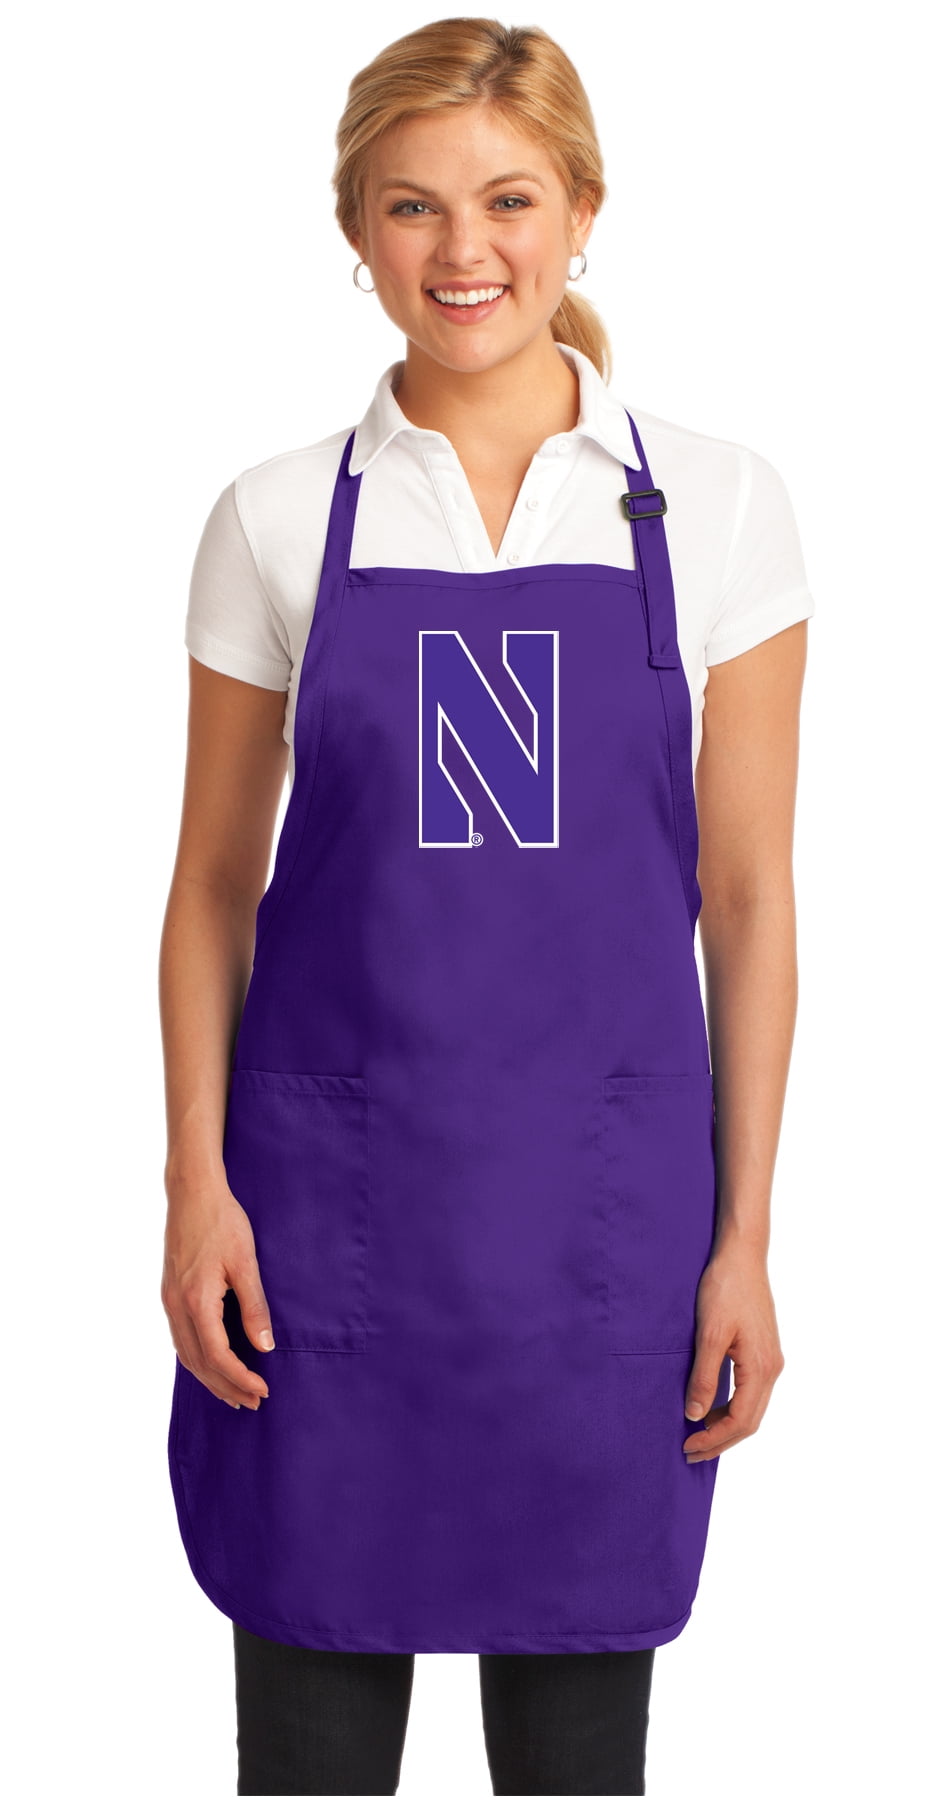 Broad Bay USNA Navy Apron Large Size Naval Academy Aprons for Men or Women 